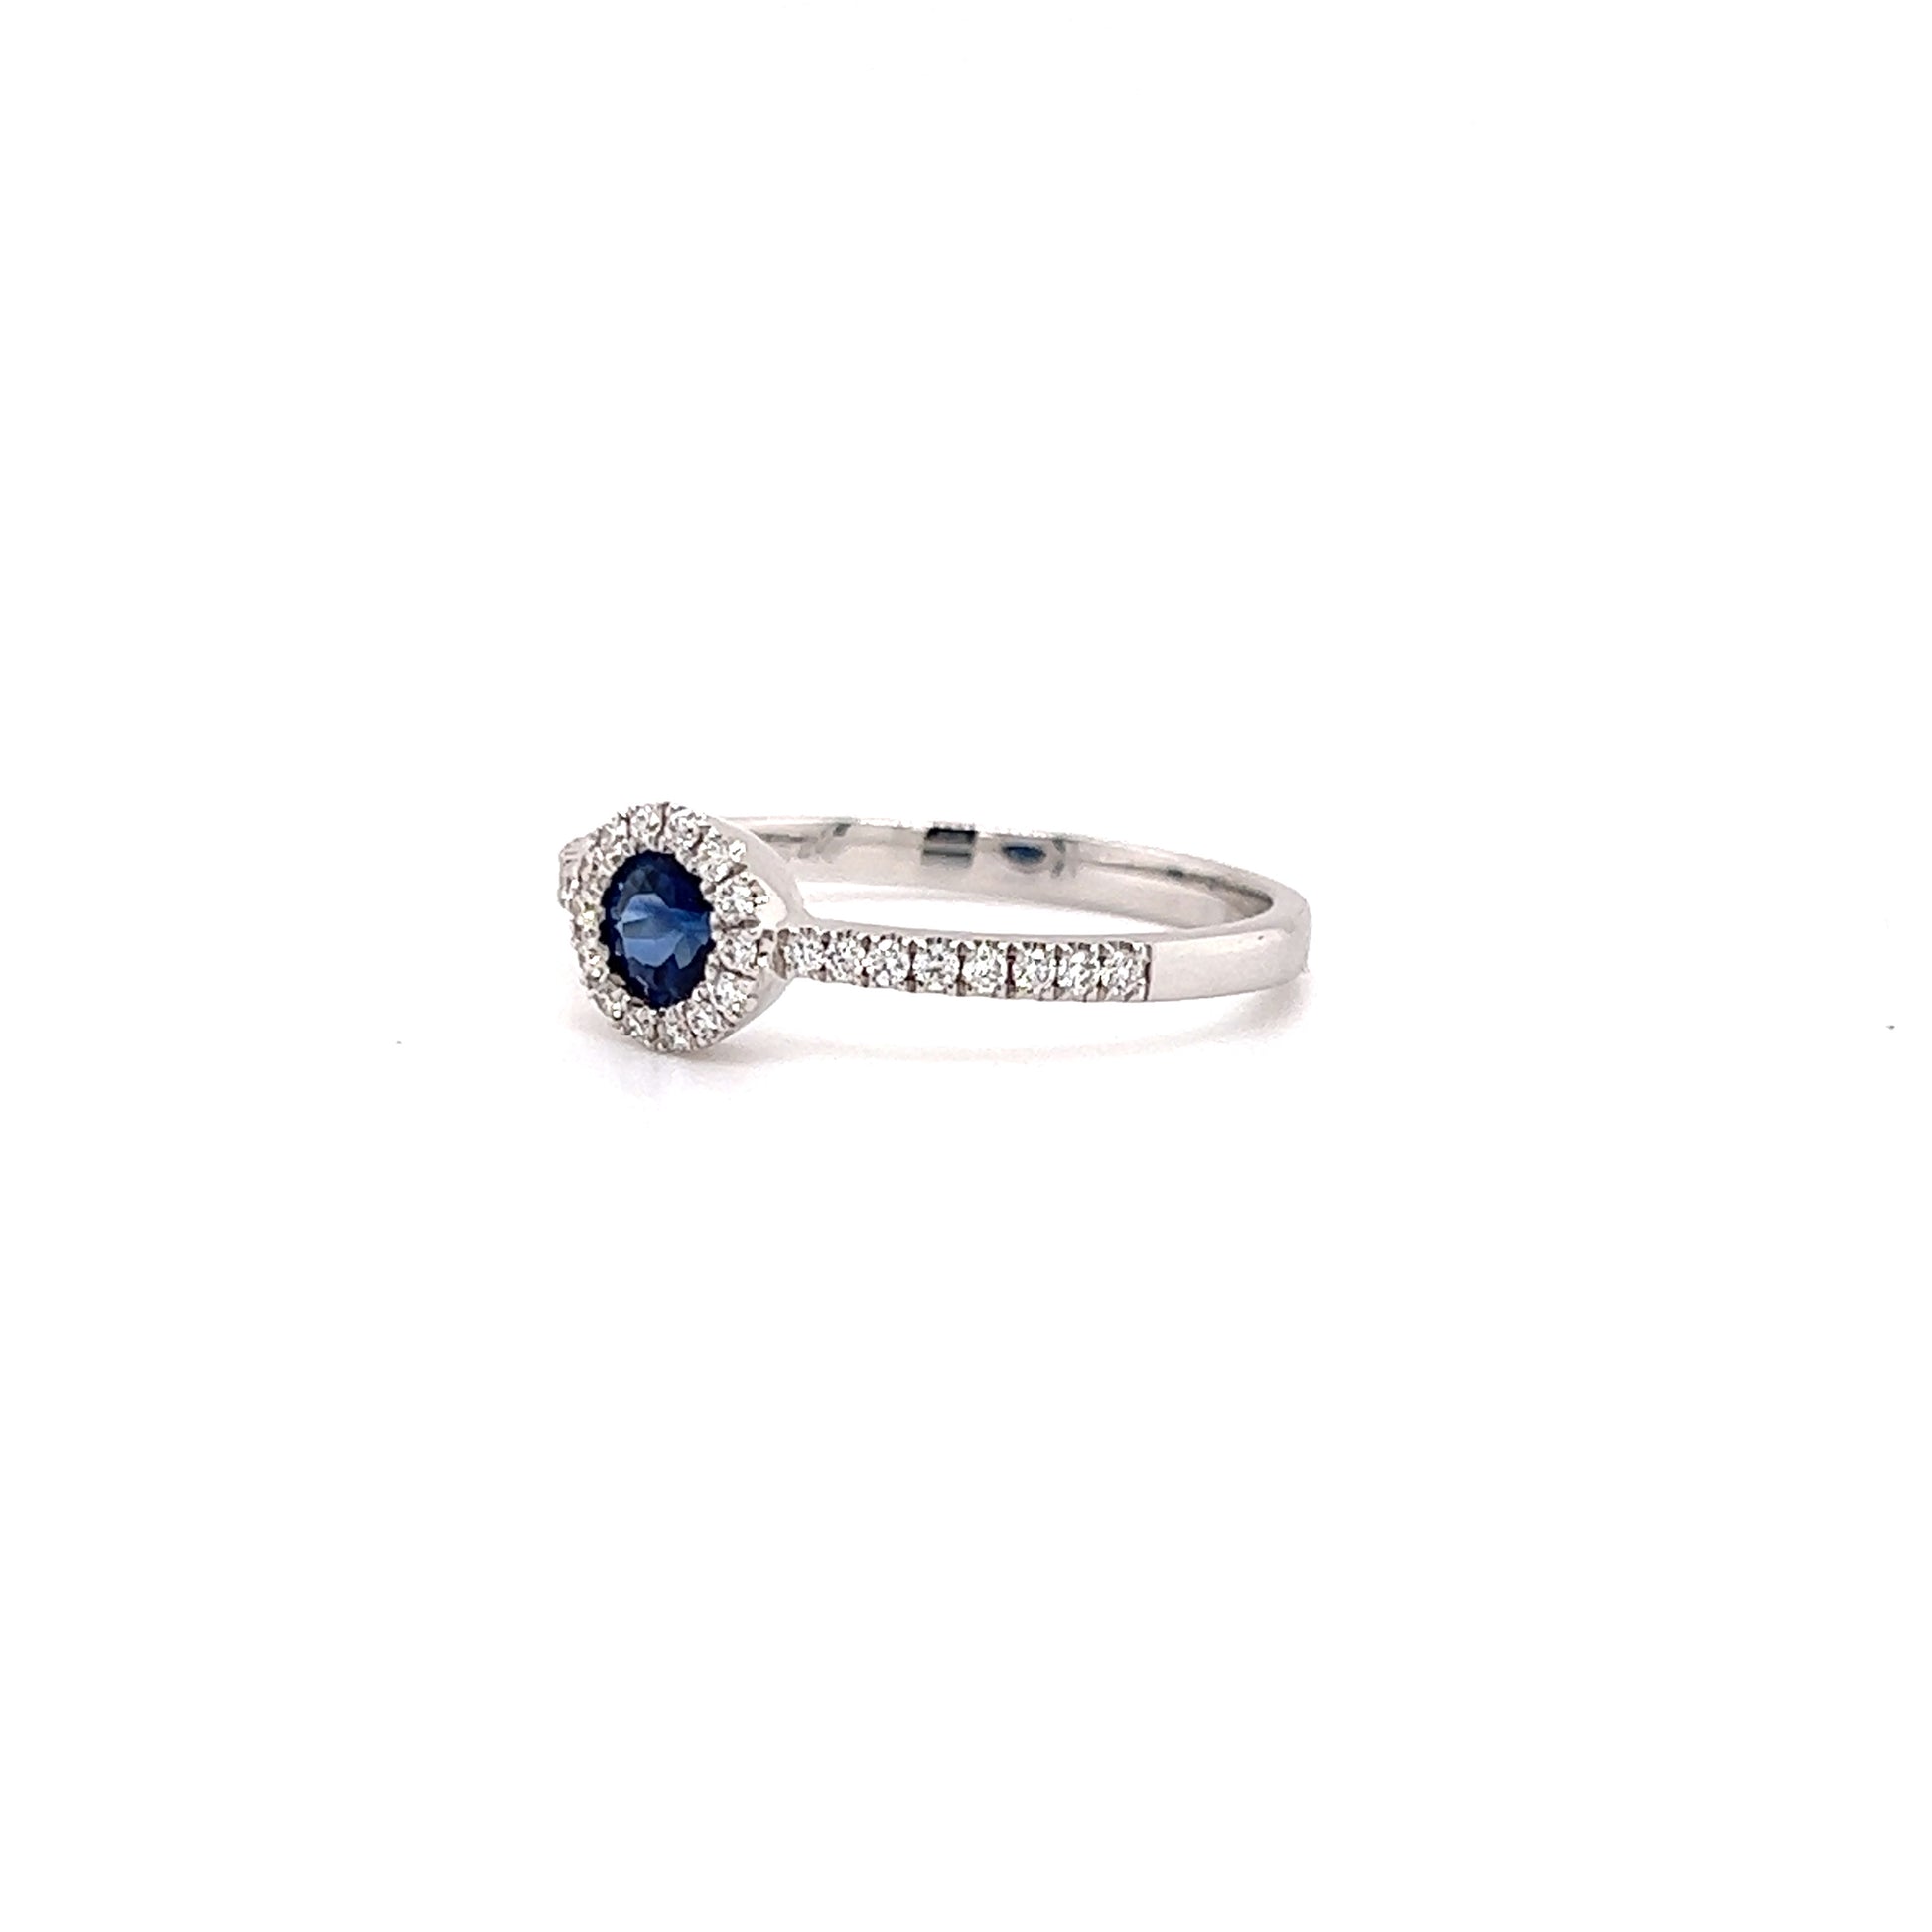 Sapphire Bezel Ring with Diamond Halo in 14K While Gold Right Side View